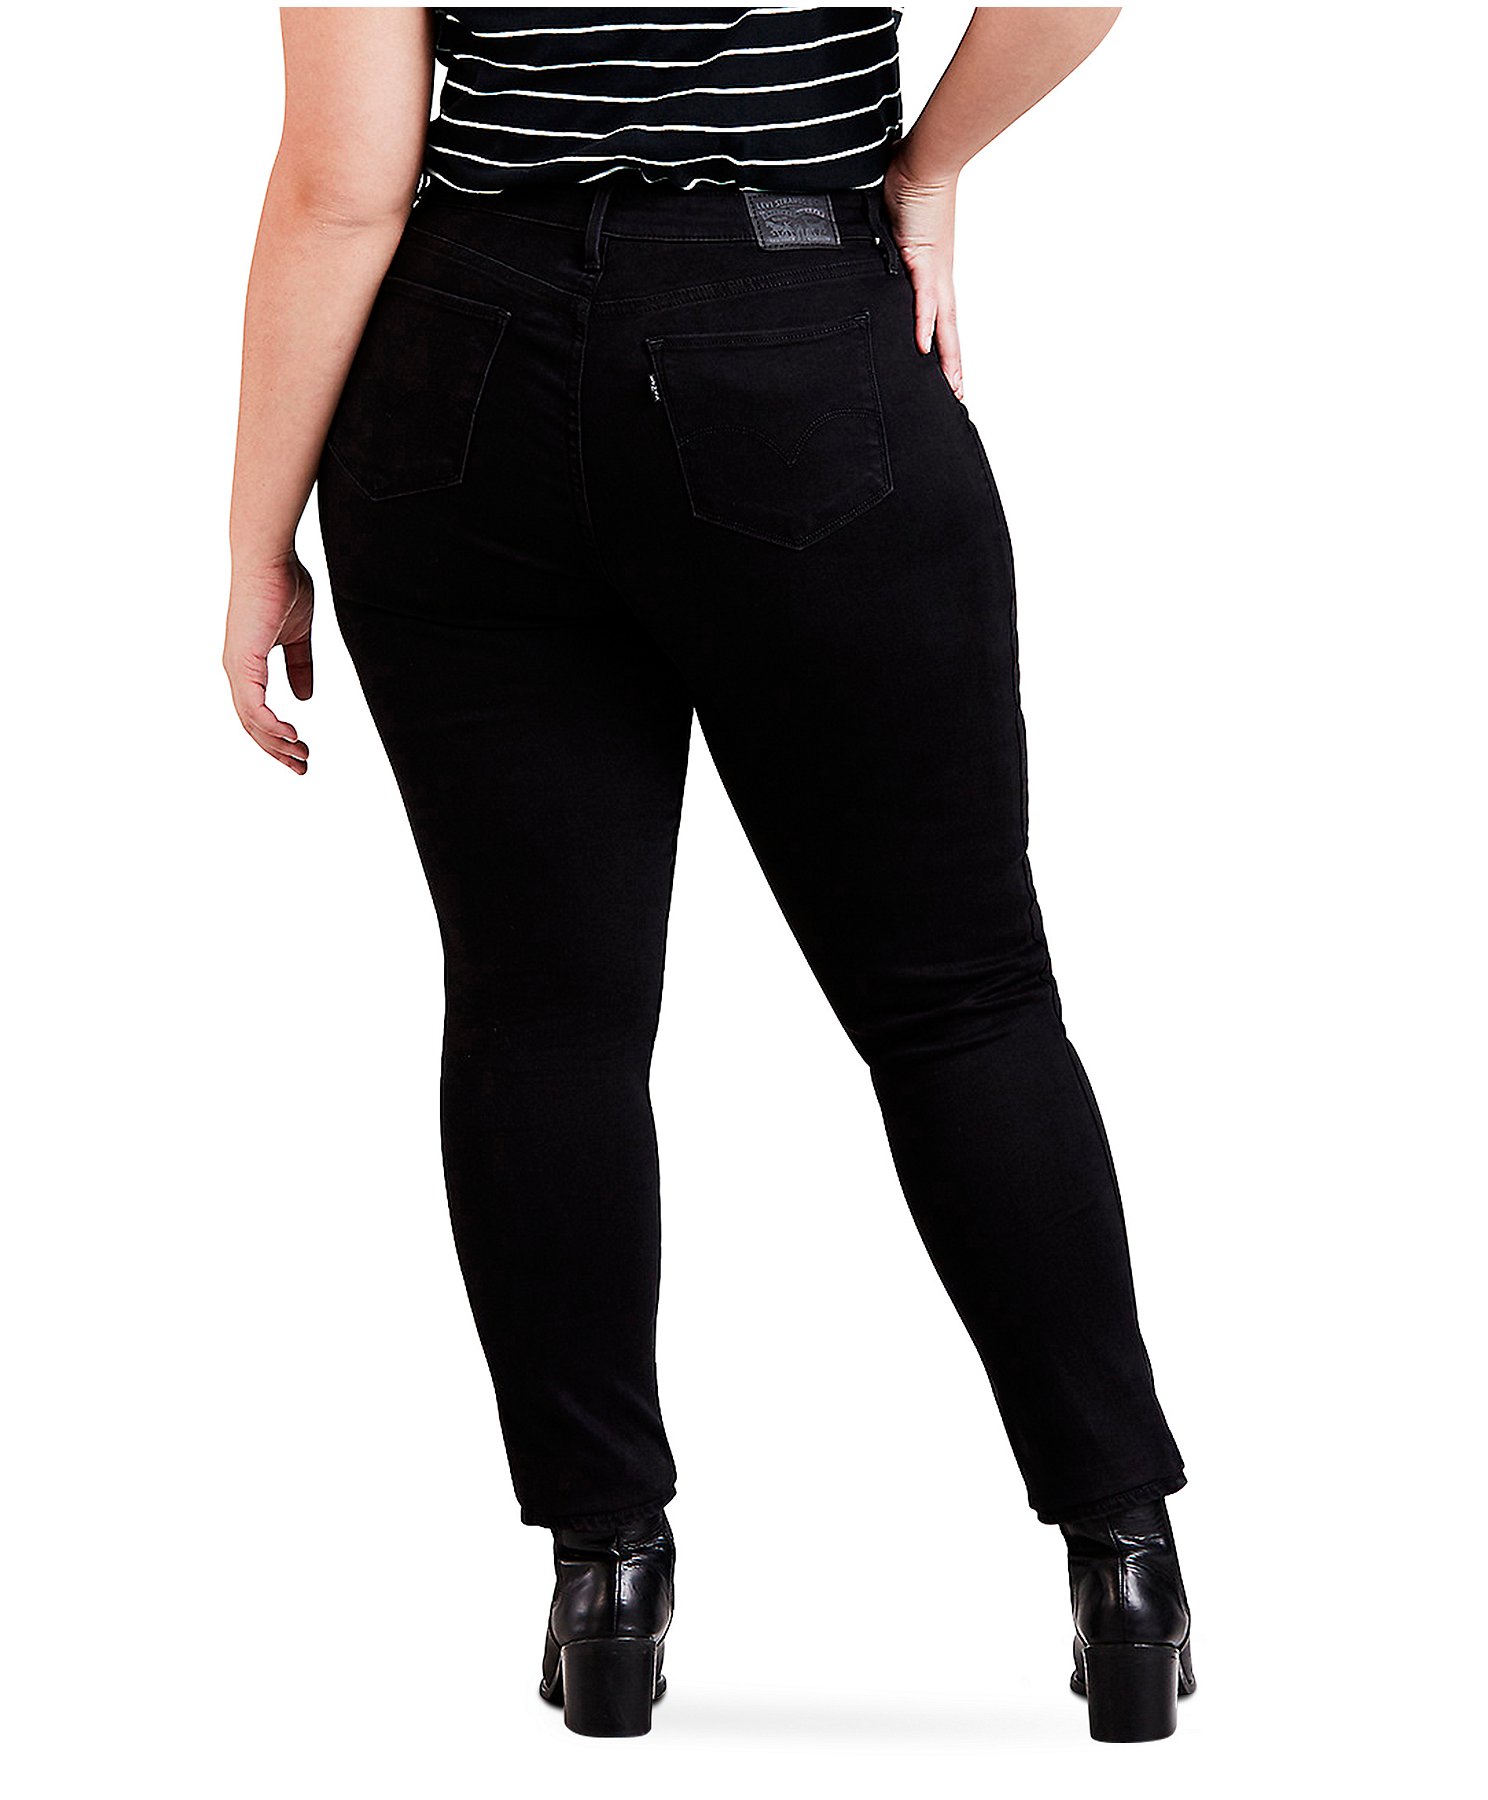 Women S 311 Shaping Skinny Jeans Plus Size L Equipeur